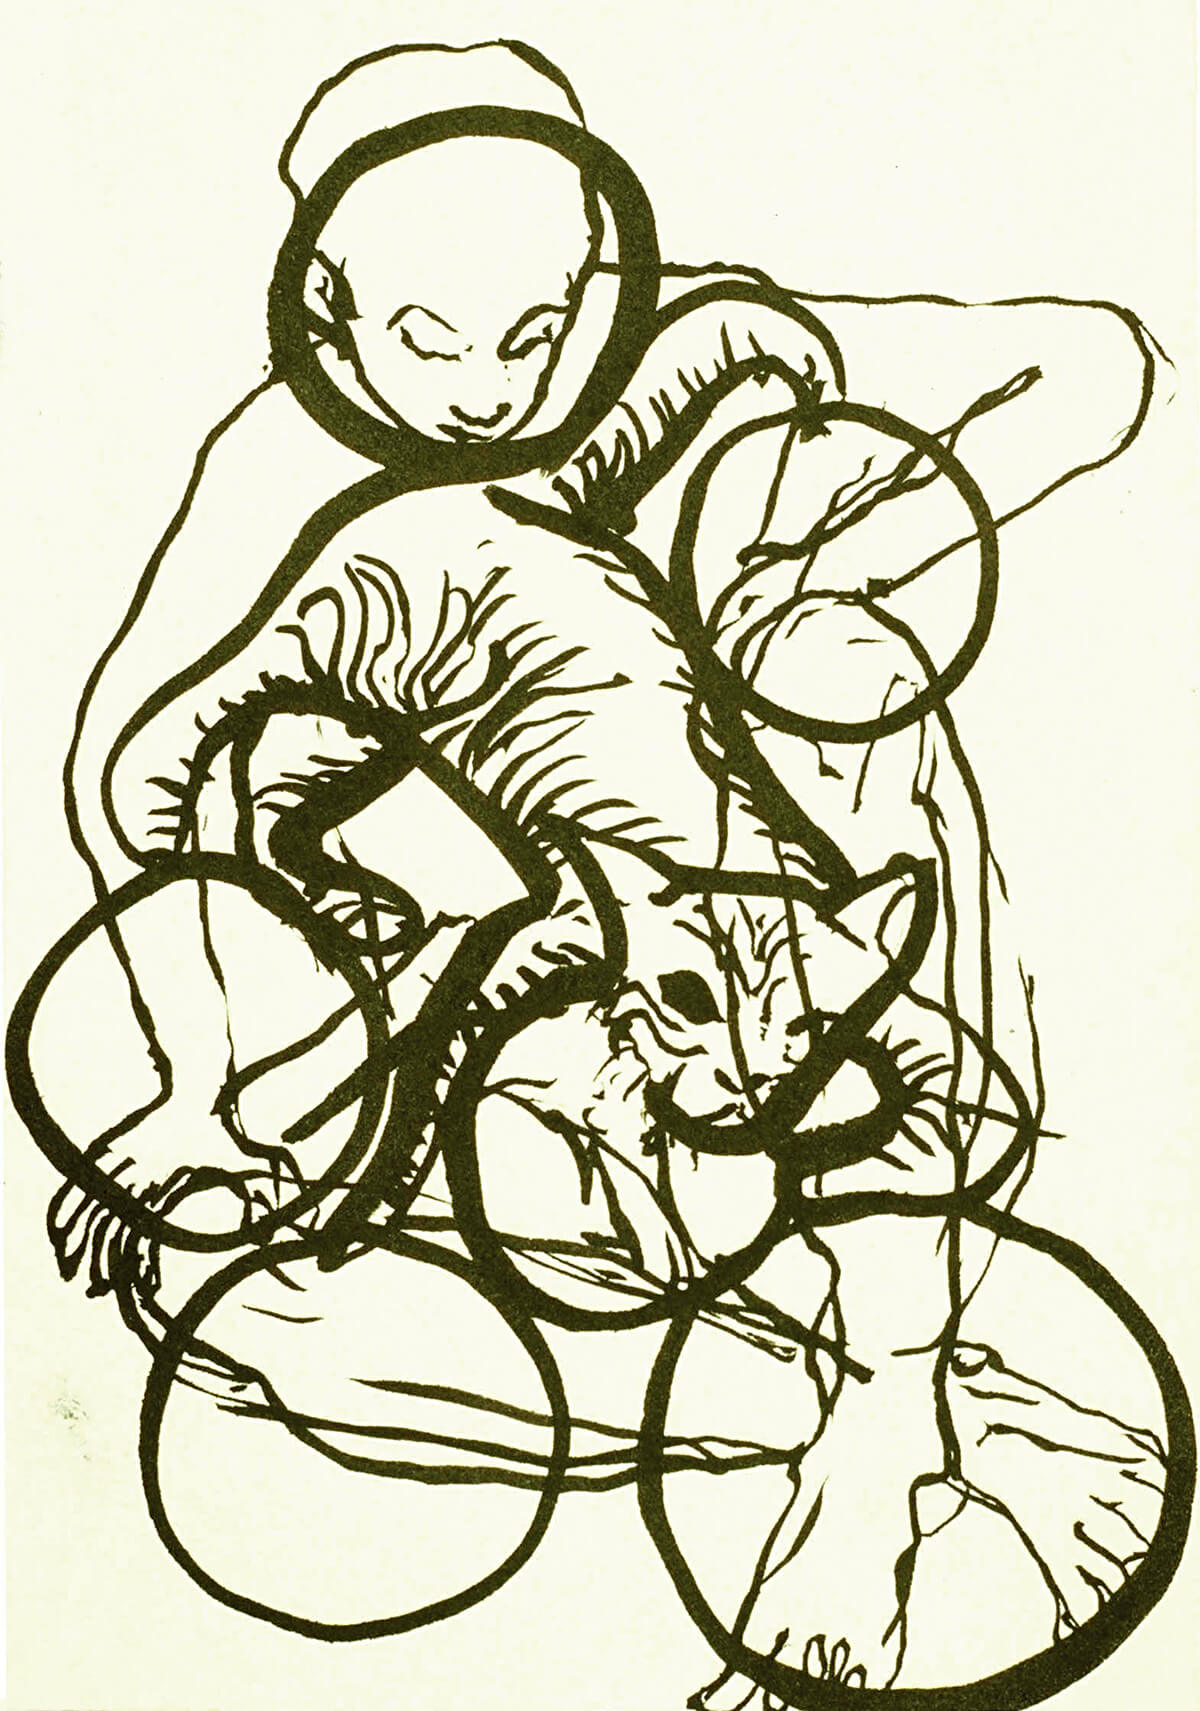 untitled (person, cat and cirkels), 16 x 11 cm, ink on paper, 2000